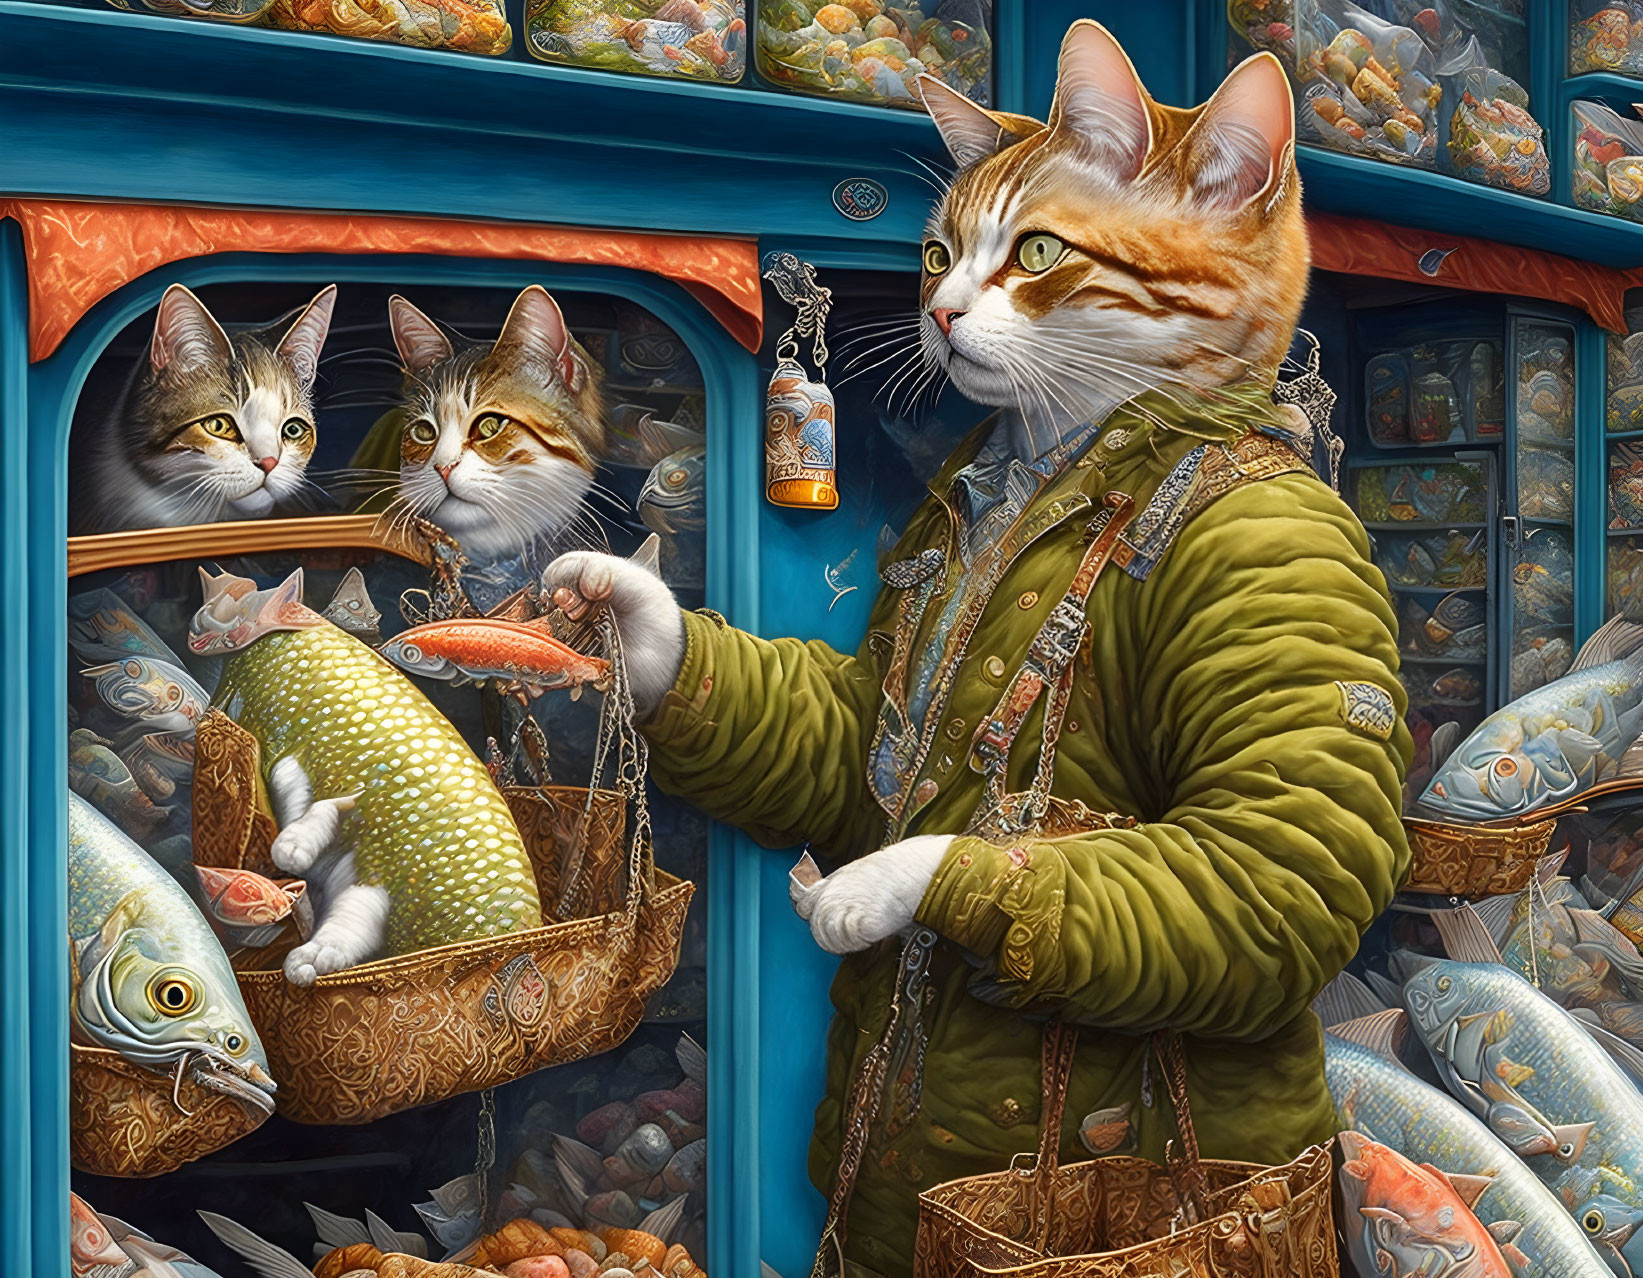 Cat with a bag buys fish in the market. extreme de